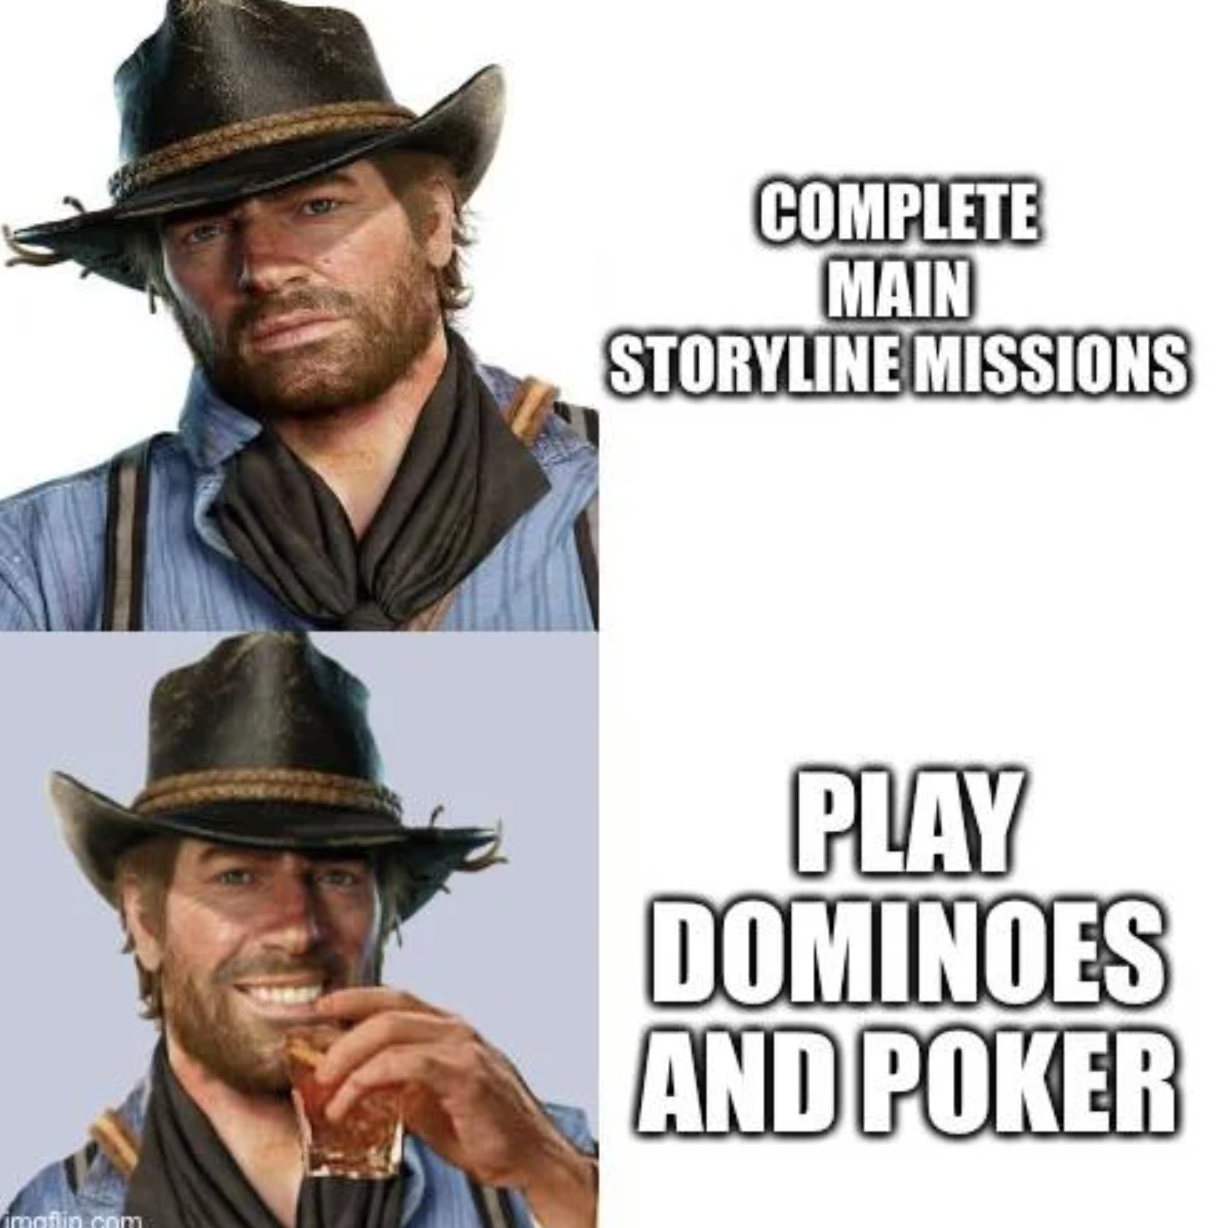 funny gaming memes - fedora - Complete Main Storyline Missions Play Dominoes And Poker in com